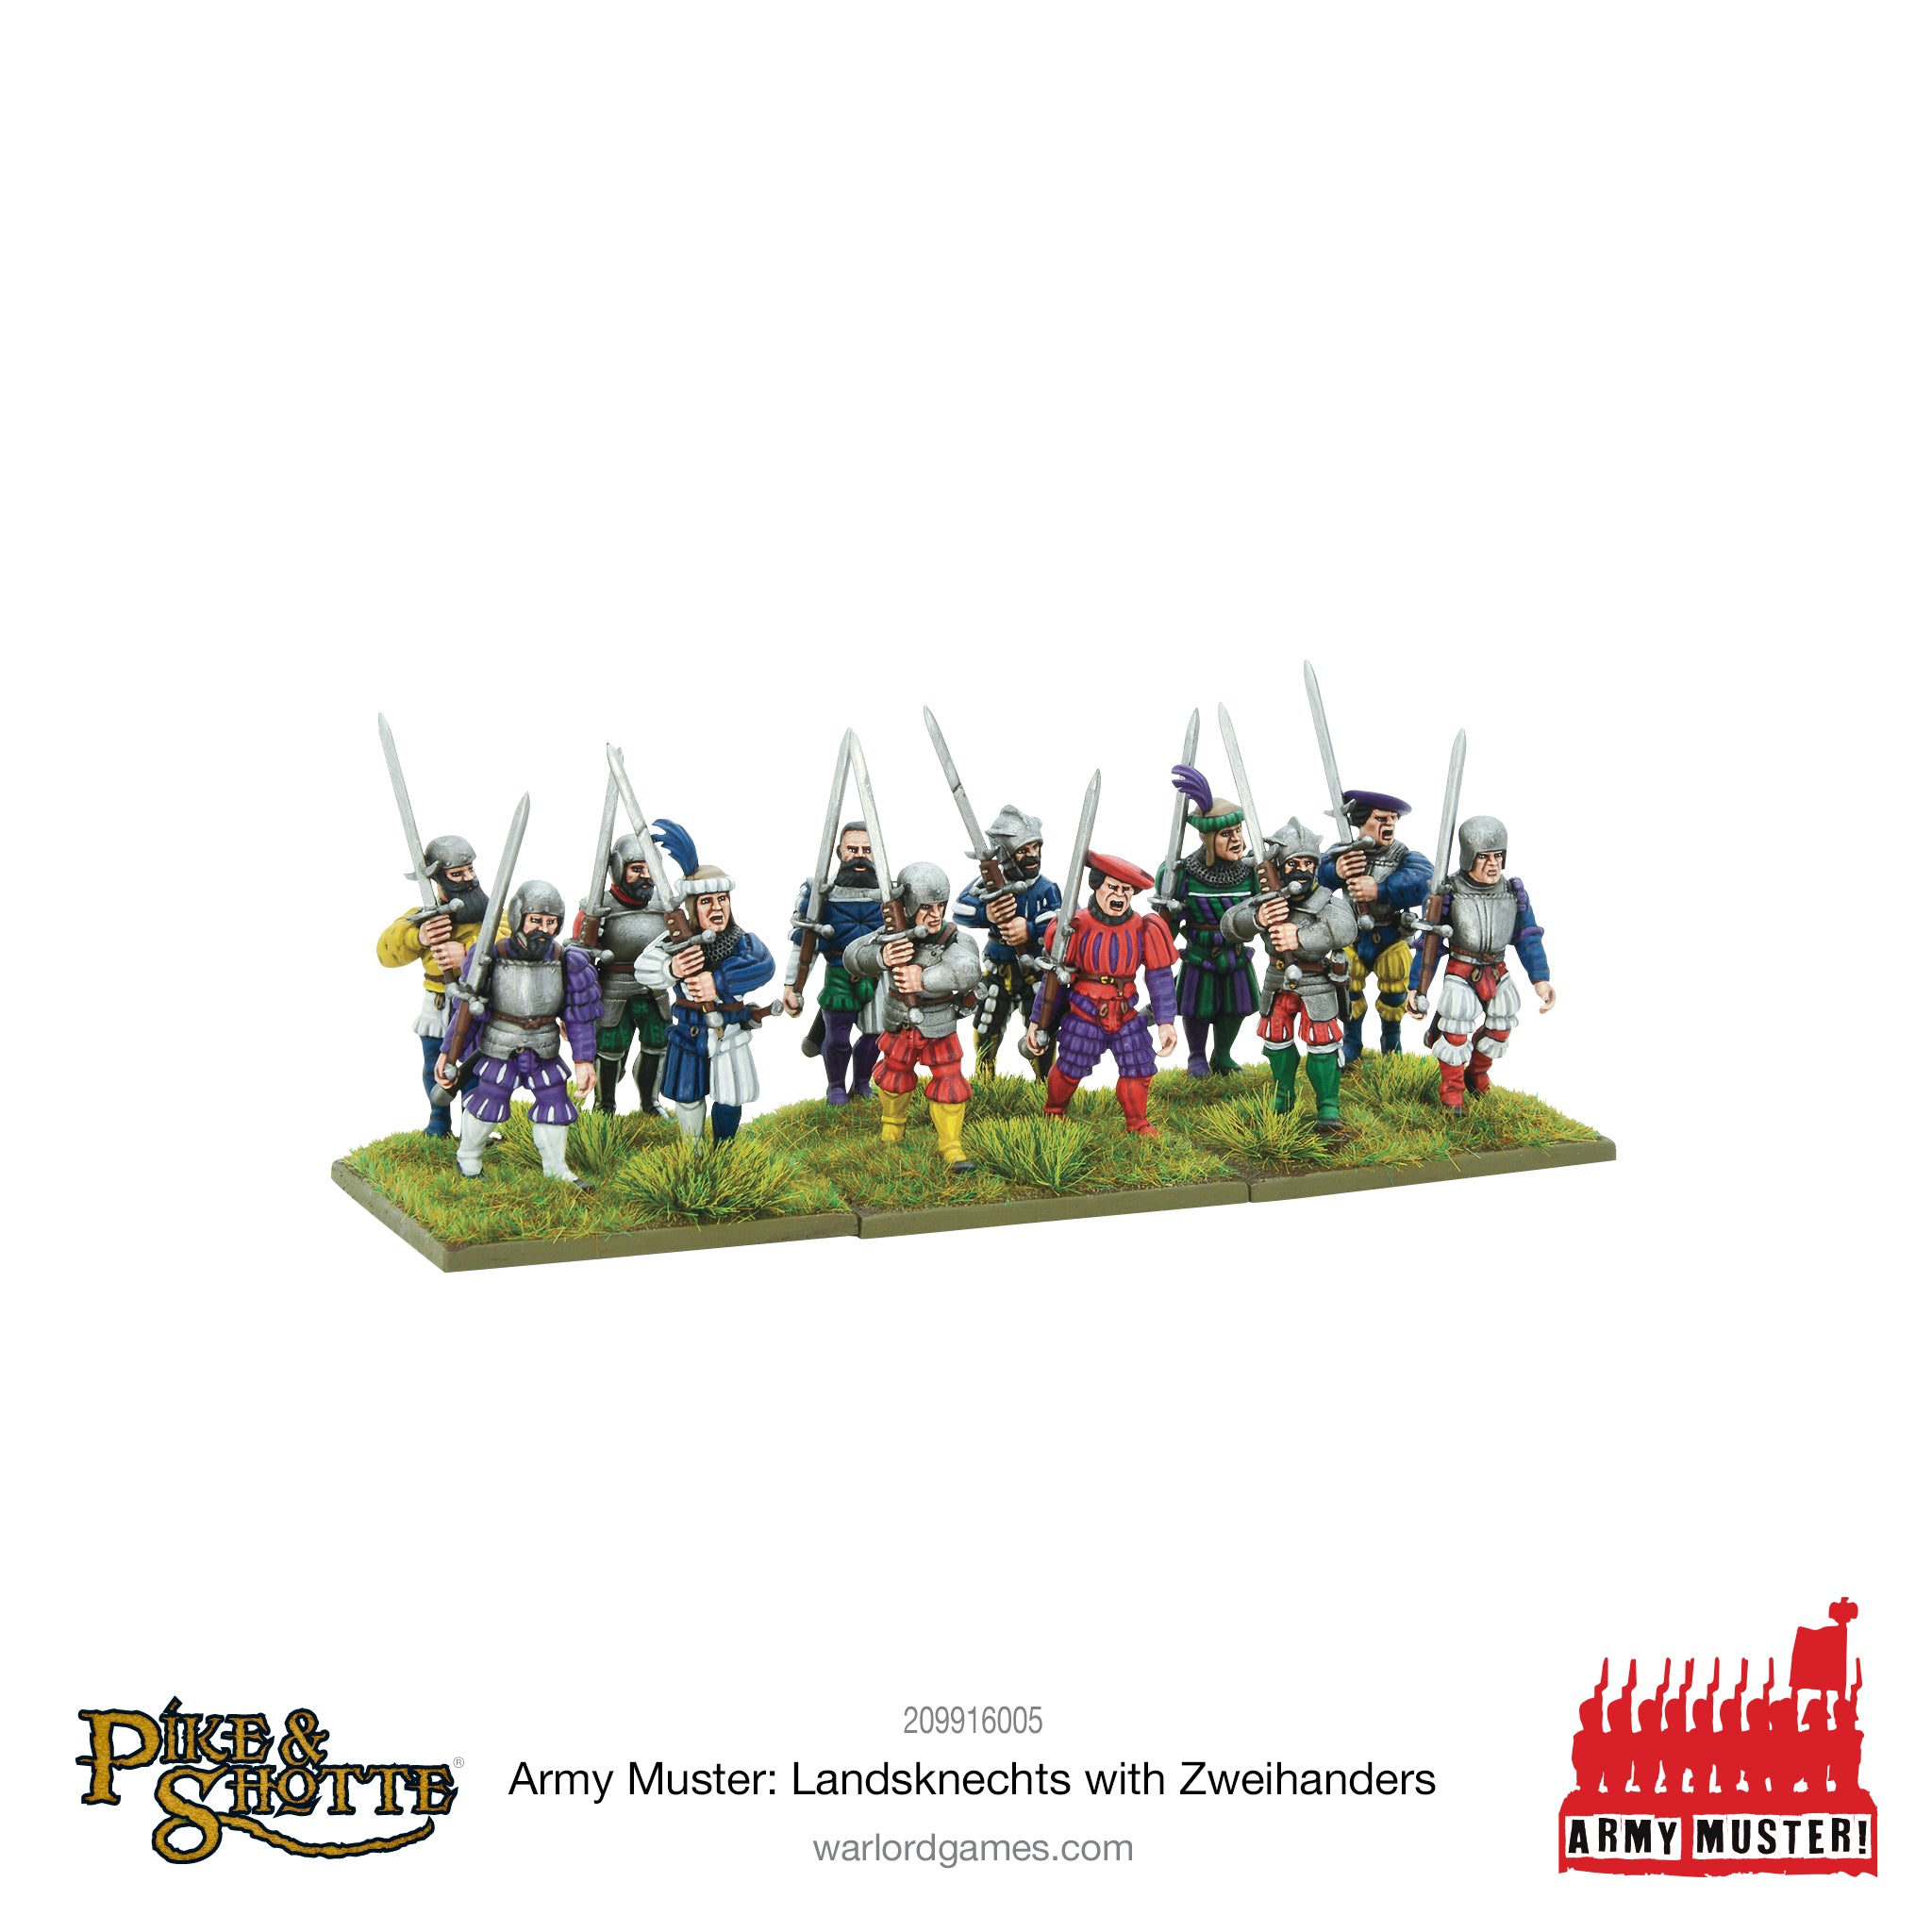 Army Muster - Landsknechts with Zweihanders